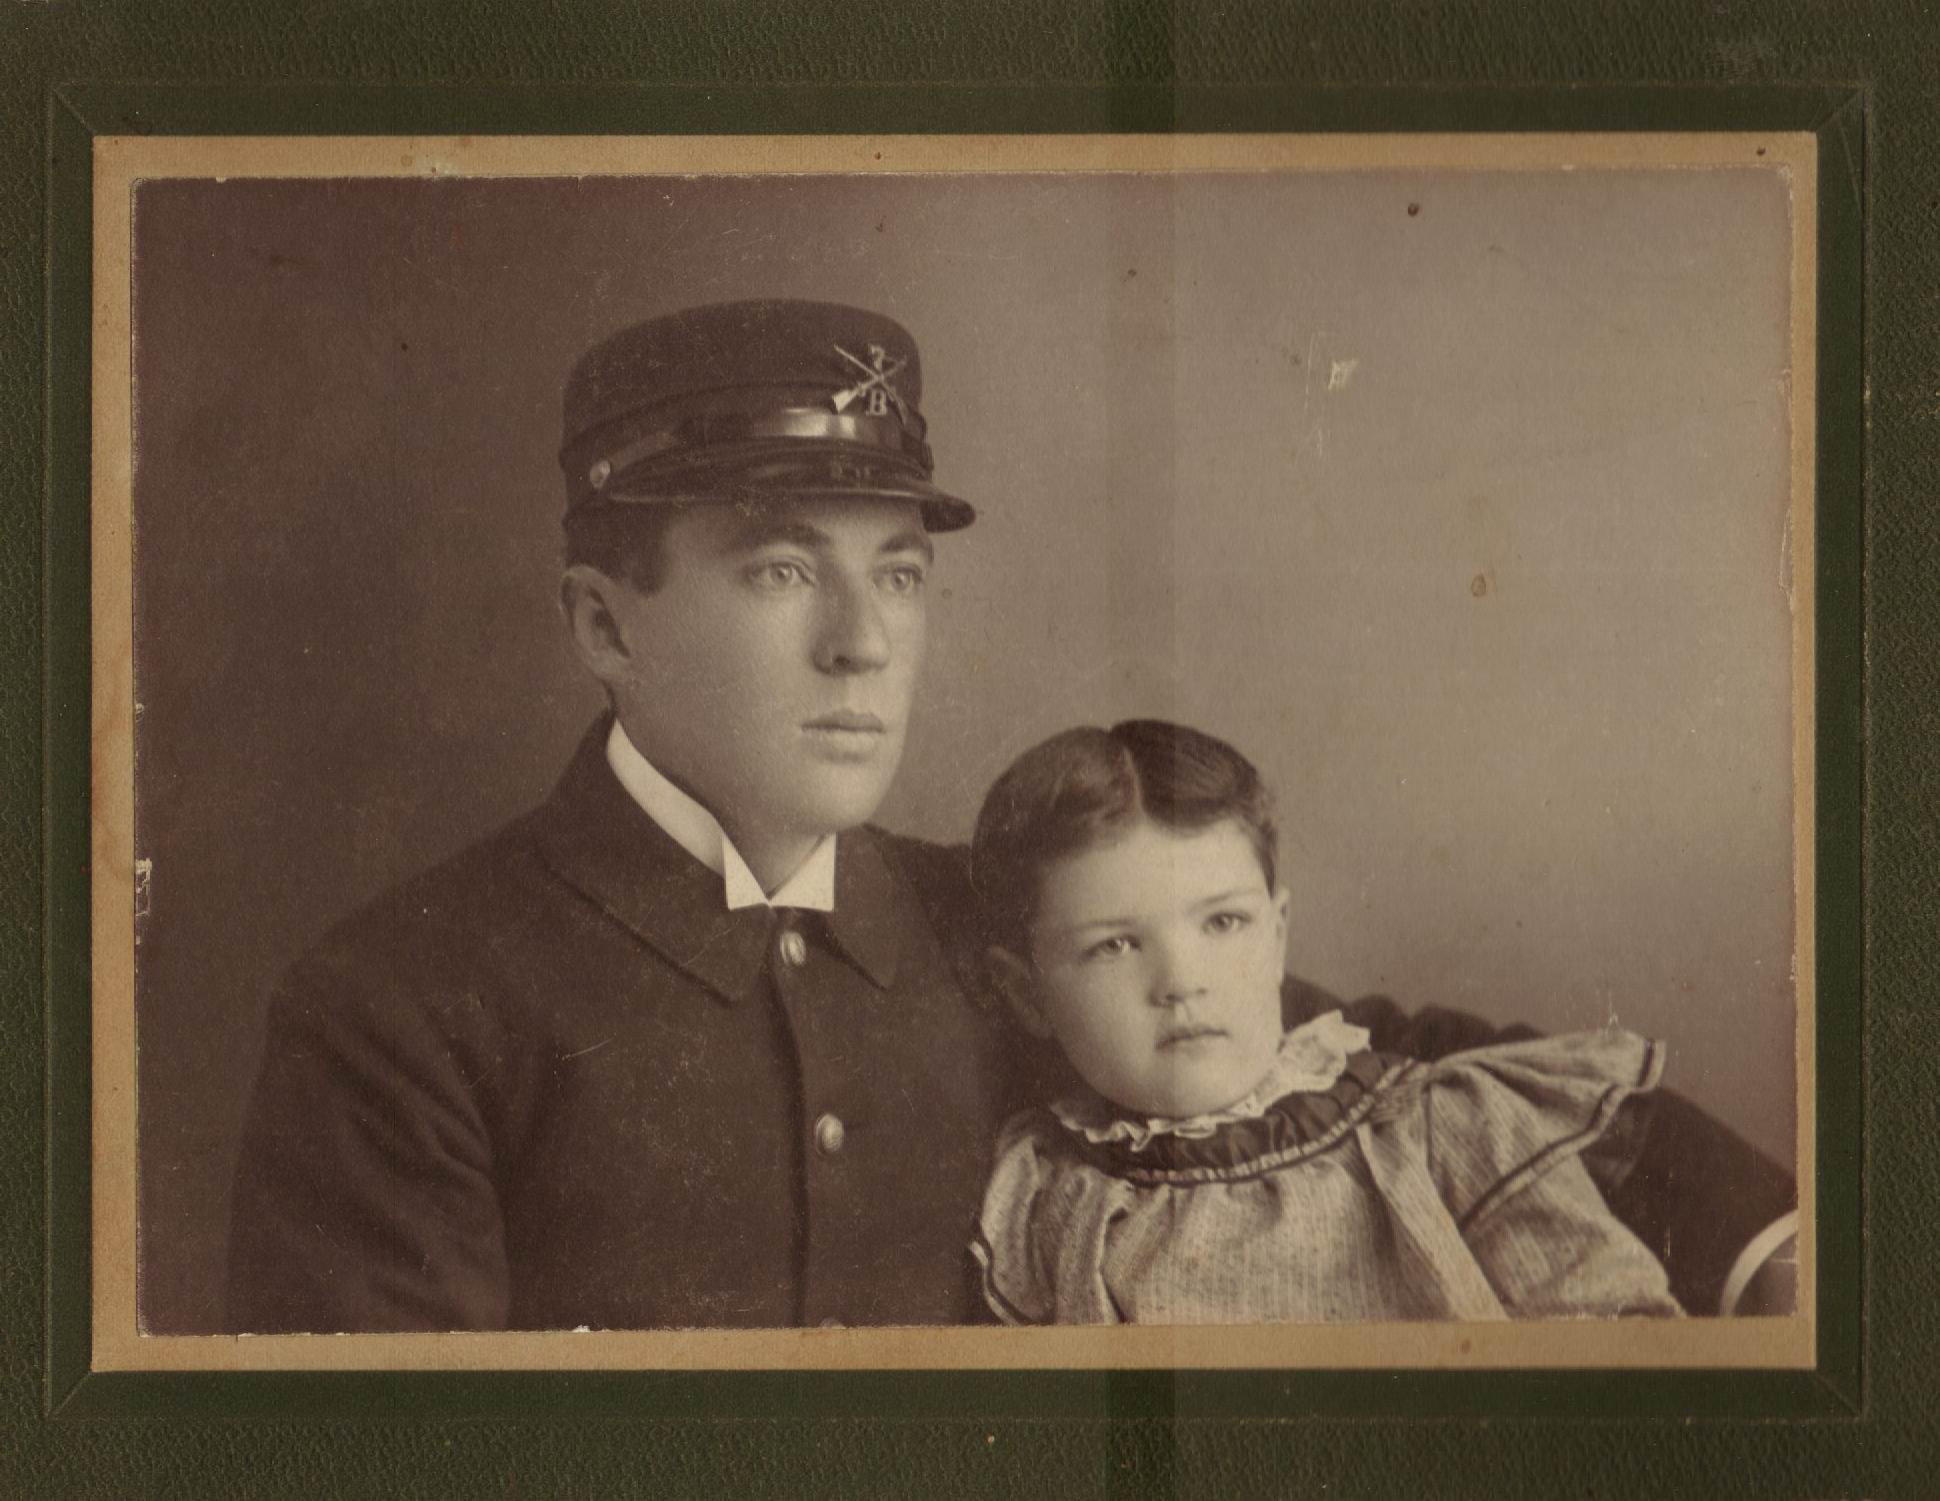 Gladys Noble and her father, my grandfather, George Noble in 1899